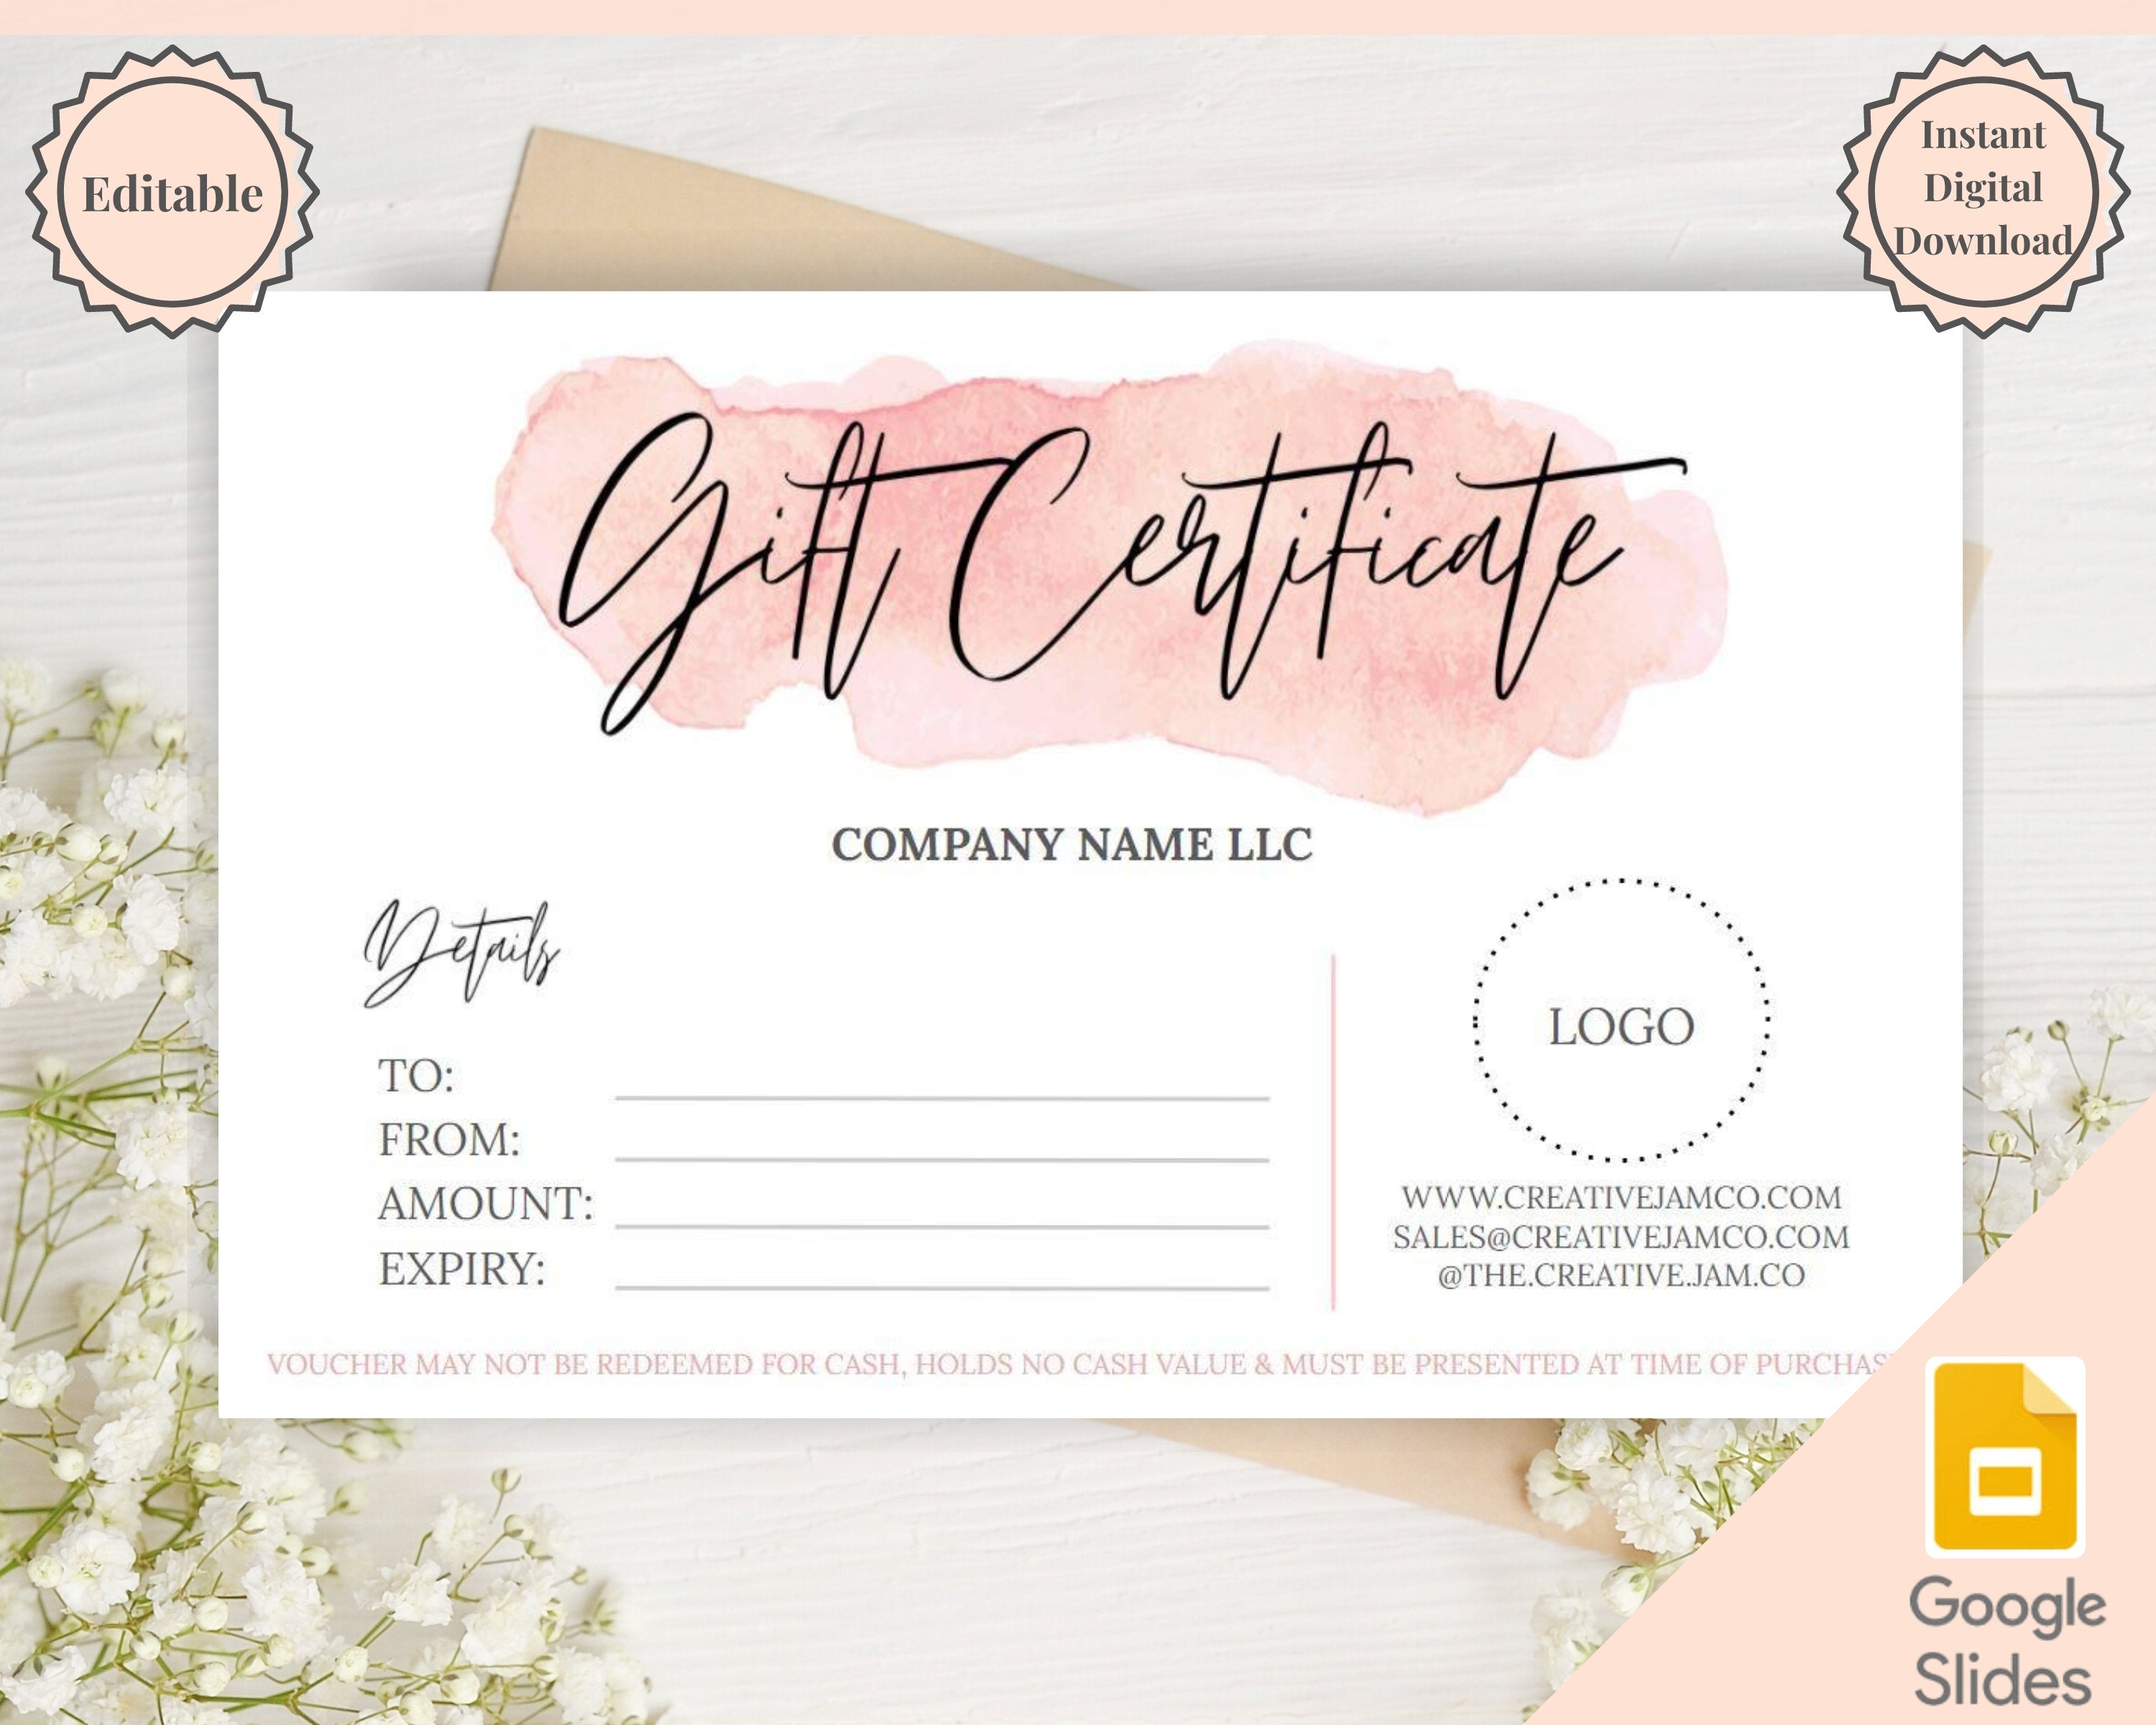 templates gift certificates